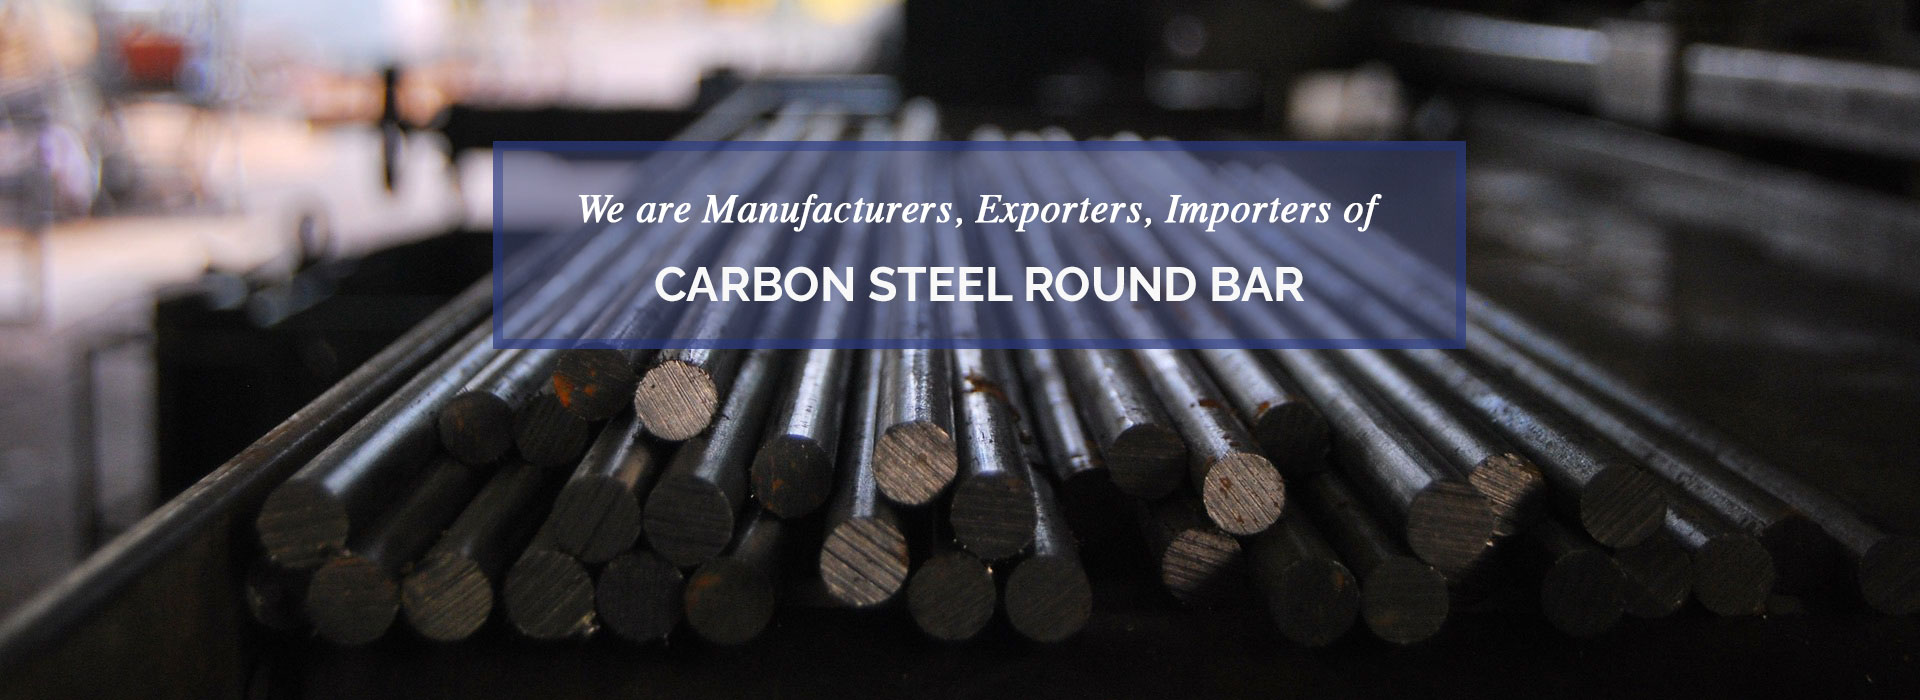 Carbon Steel Round Bar Manufacturers in Singapore